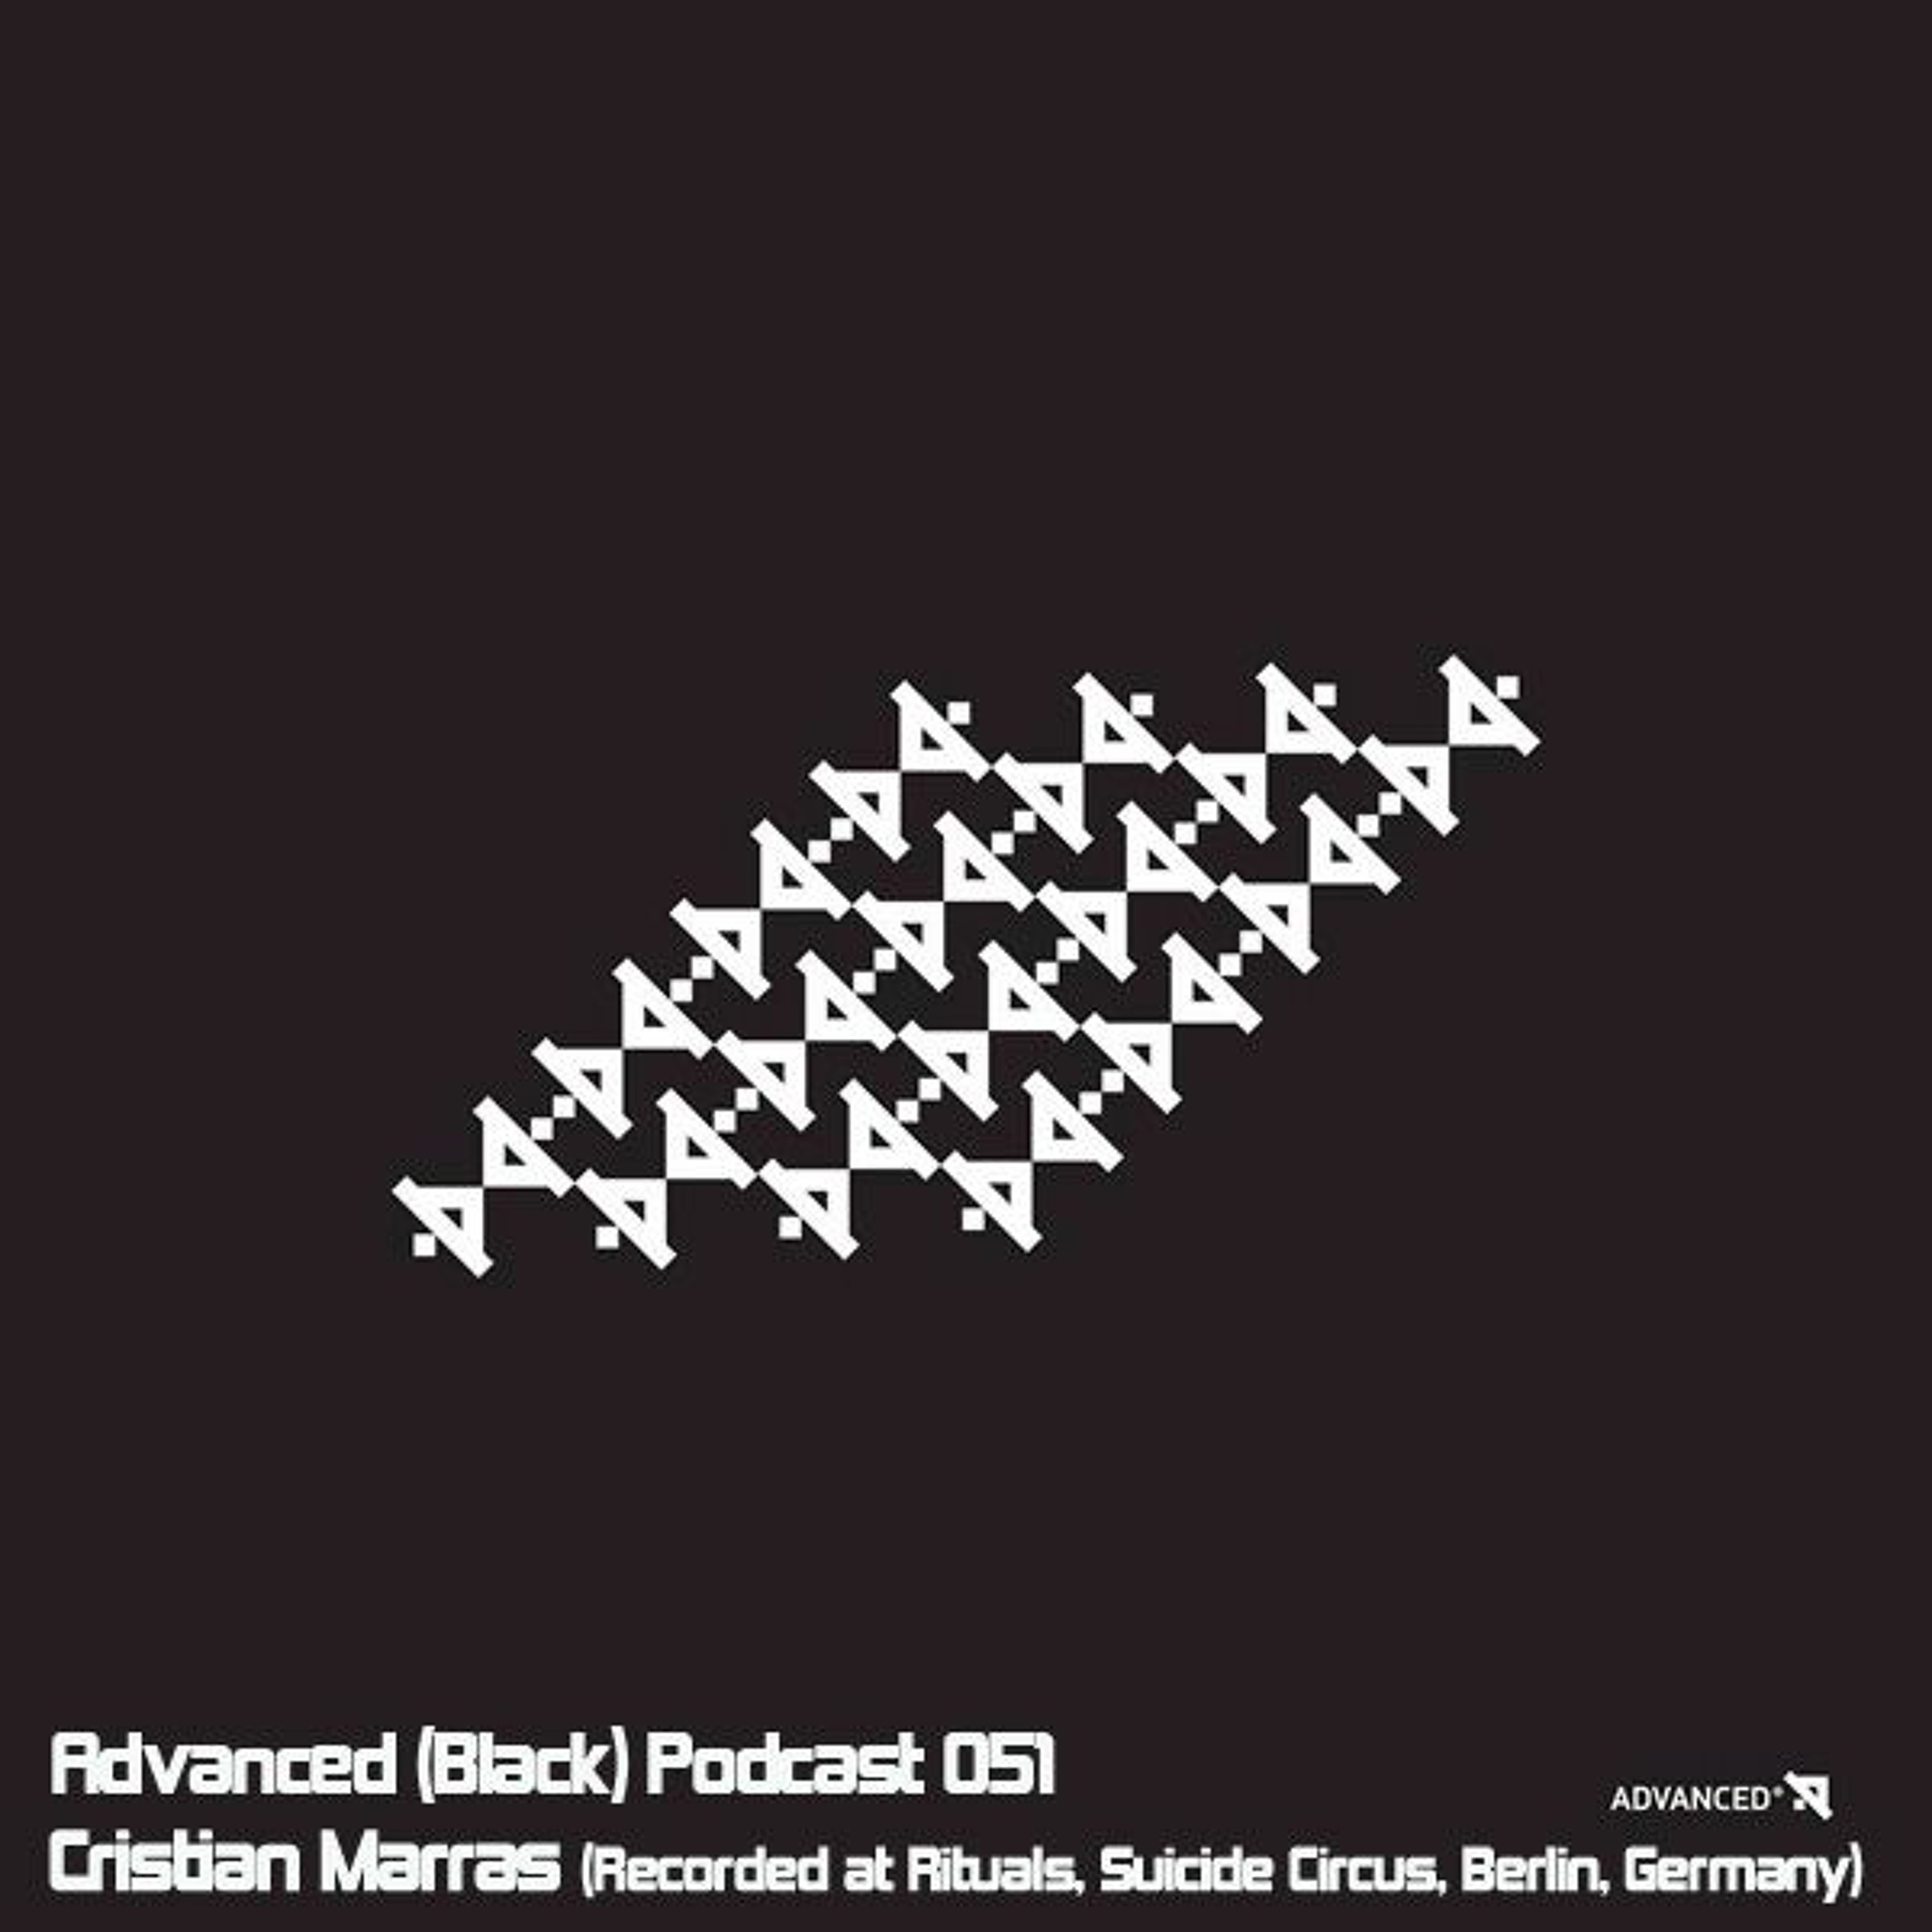 Advanced (Black) Podcast 051 with Cristian Marras (Recorded at Rituals, Suicide Circus, Berlin)